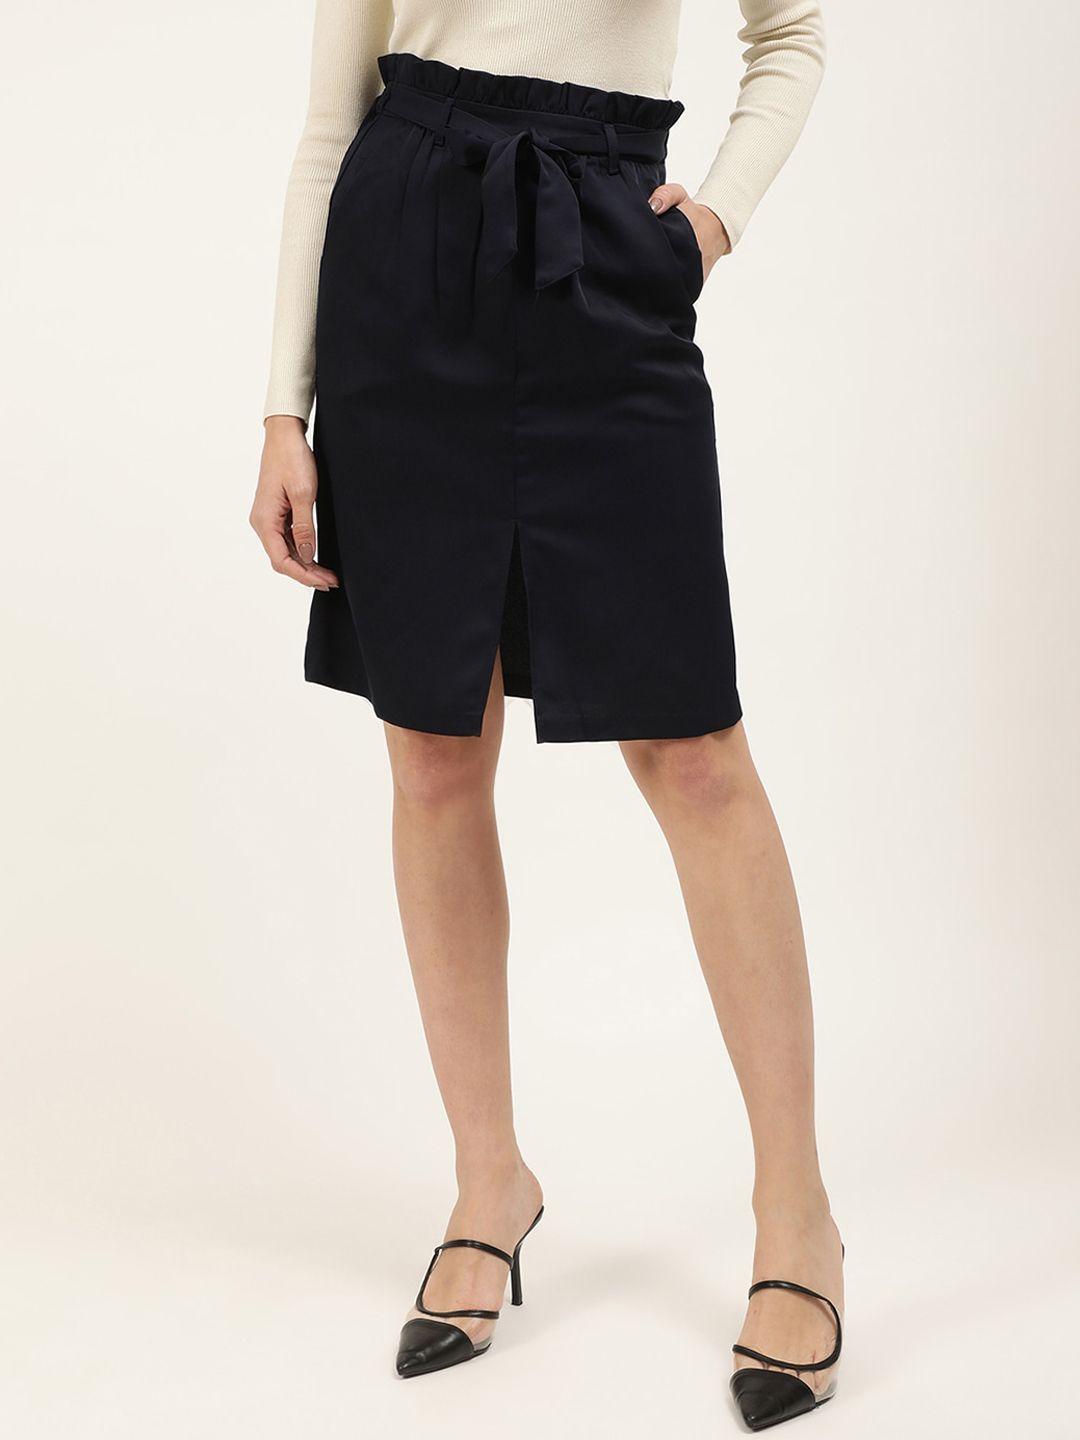 CENTRESTAGE Women Navy Blue Solid Knee Length A-Line Skirt